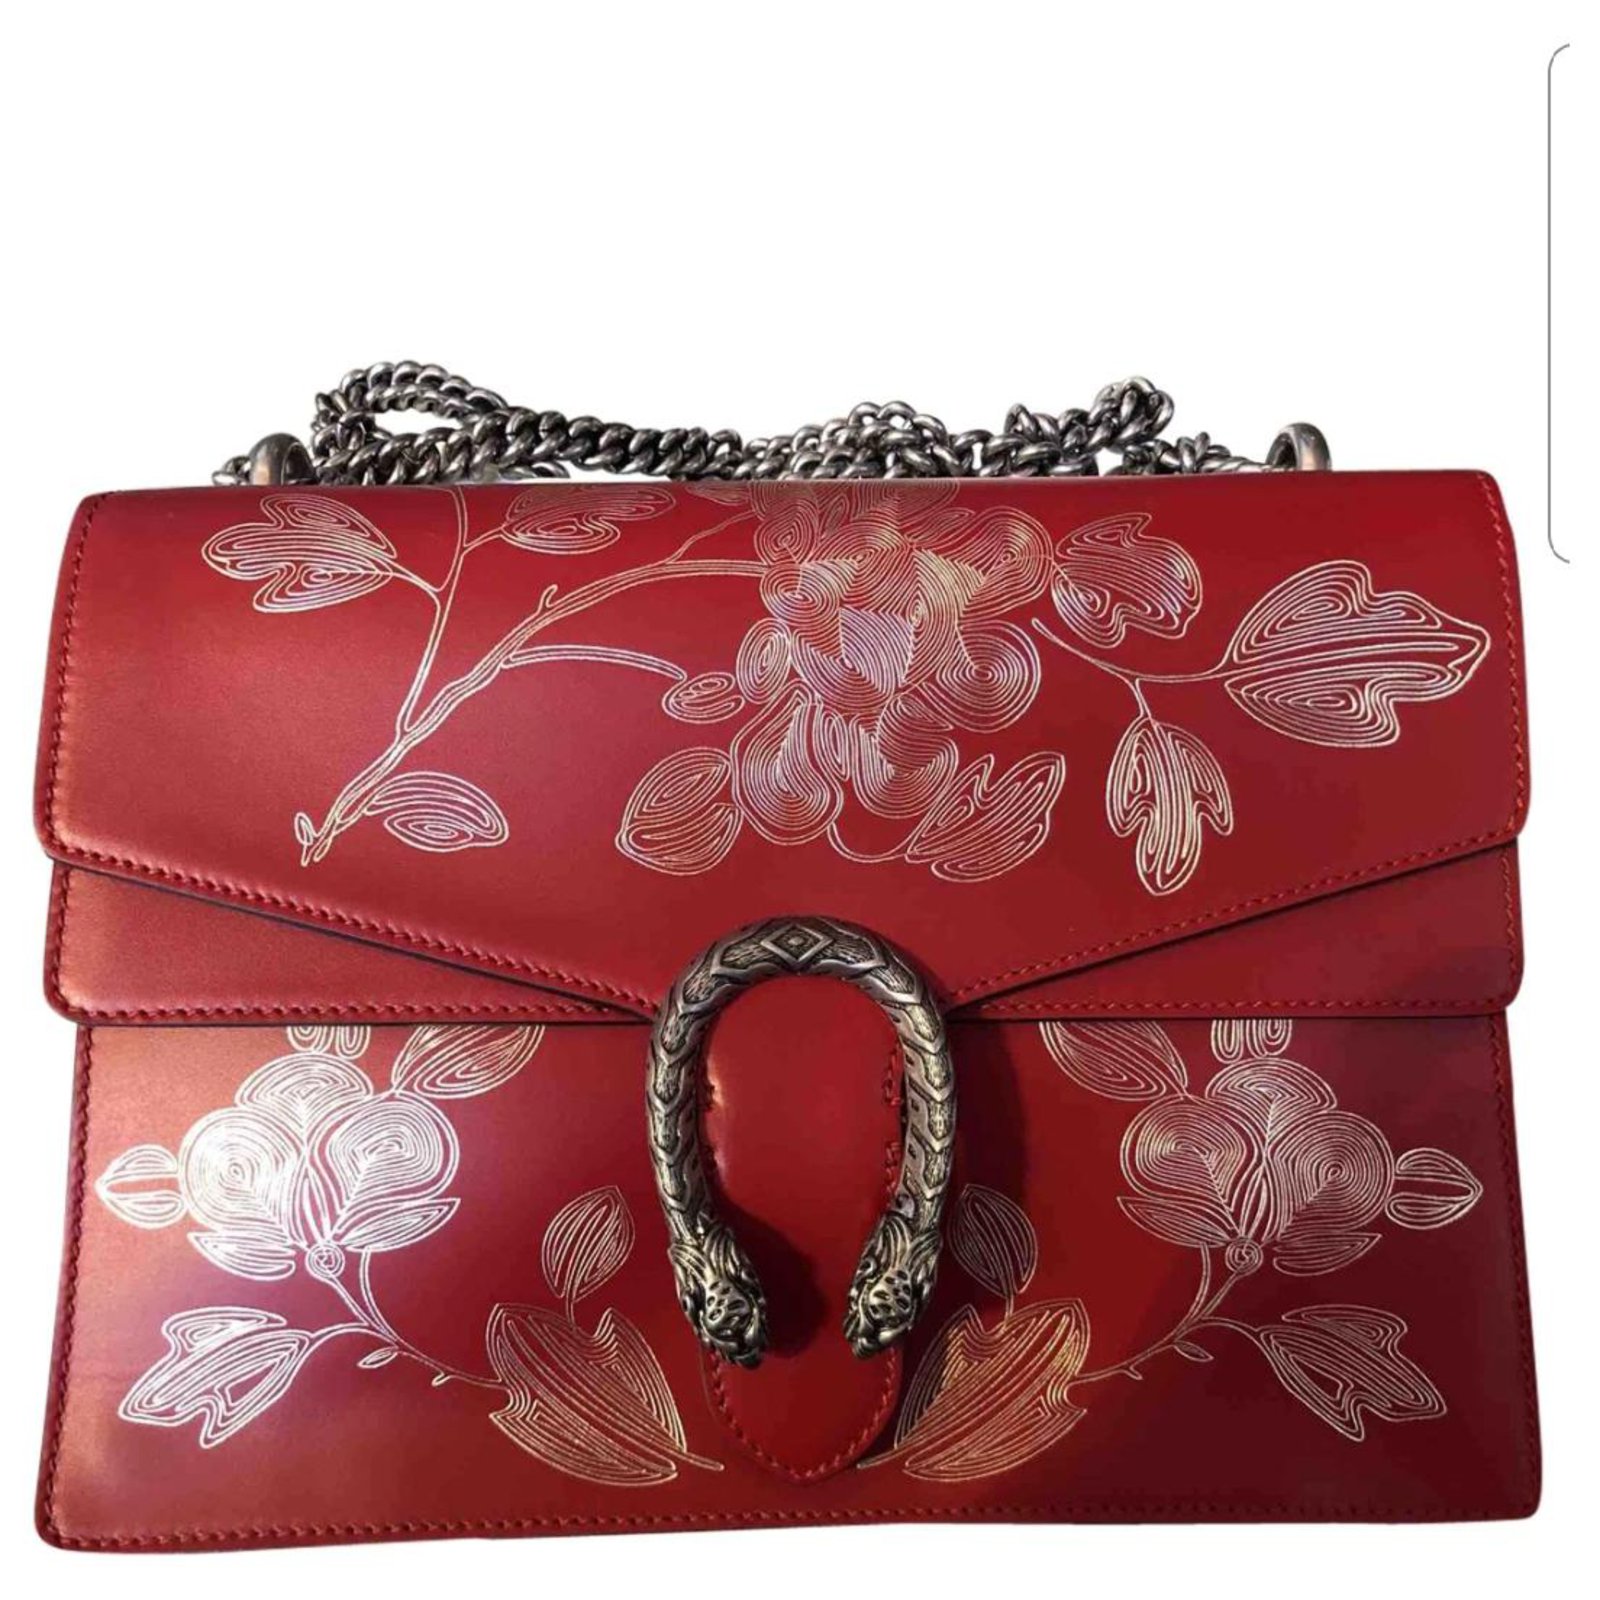 gucci bag limited edition 2018